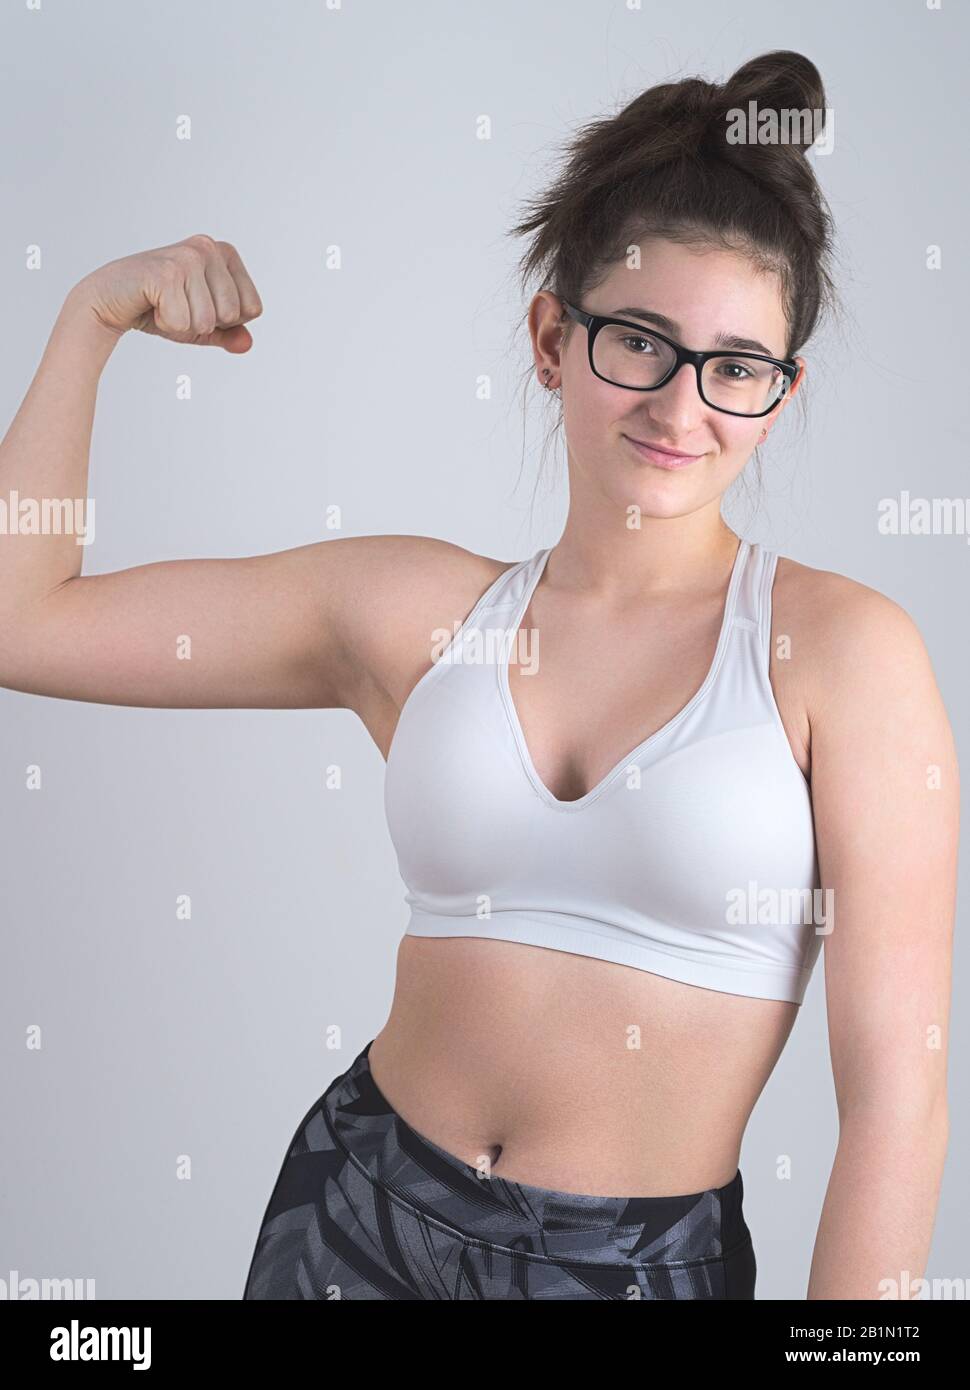 Young Bespectacled Teen Girl Posing in Sportswear Stock Photo